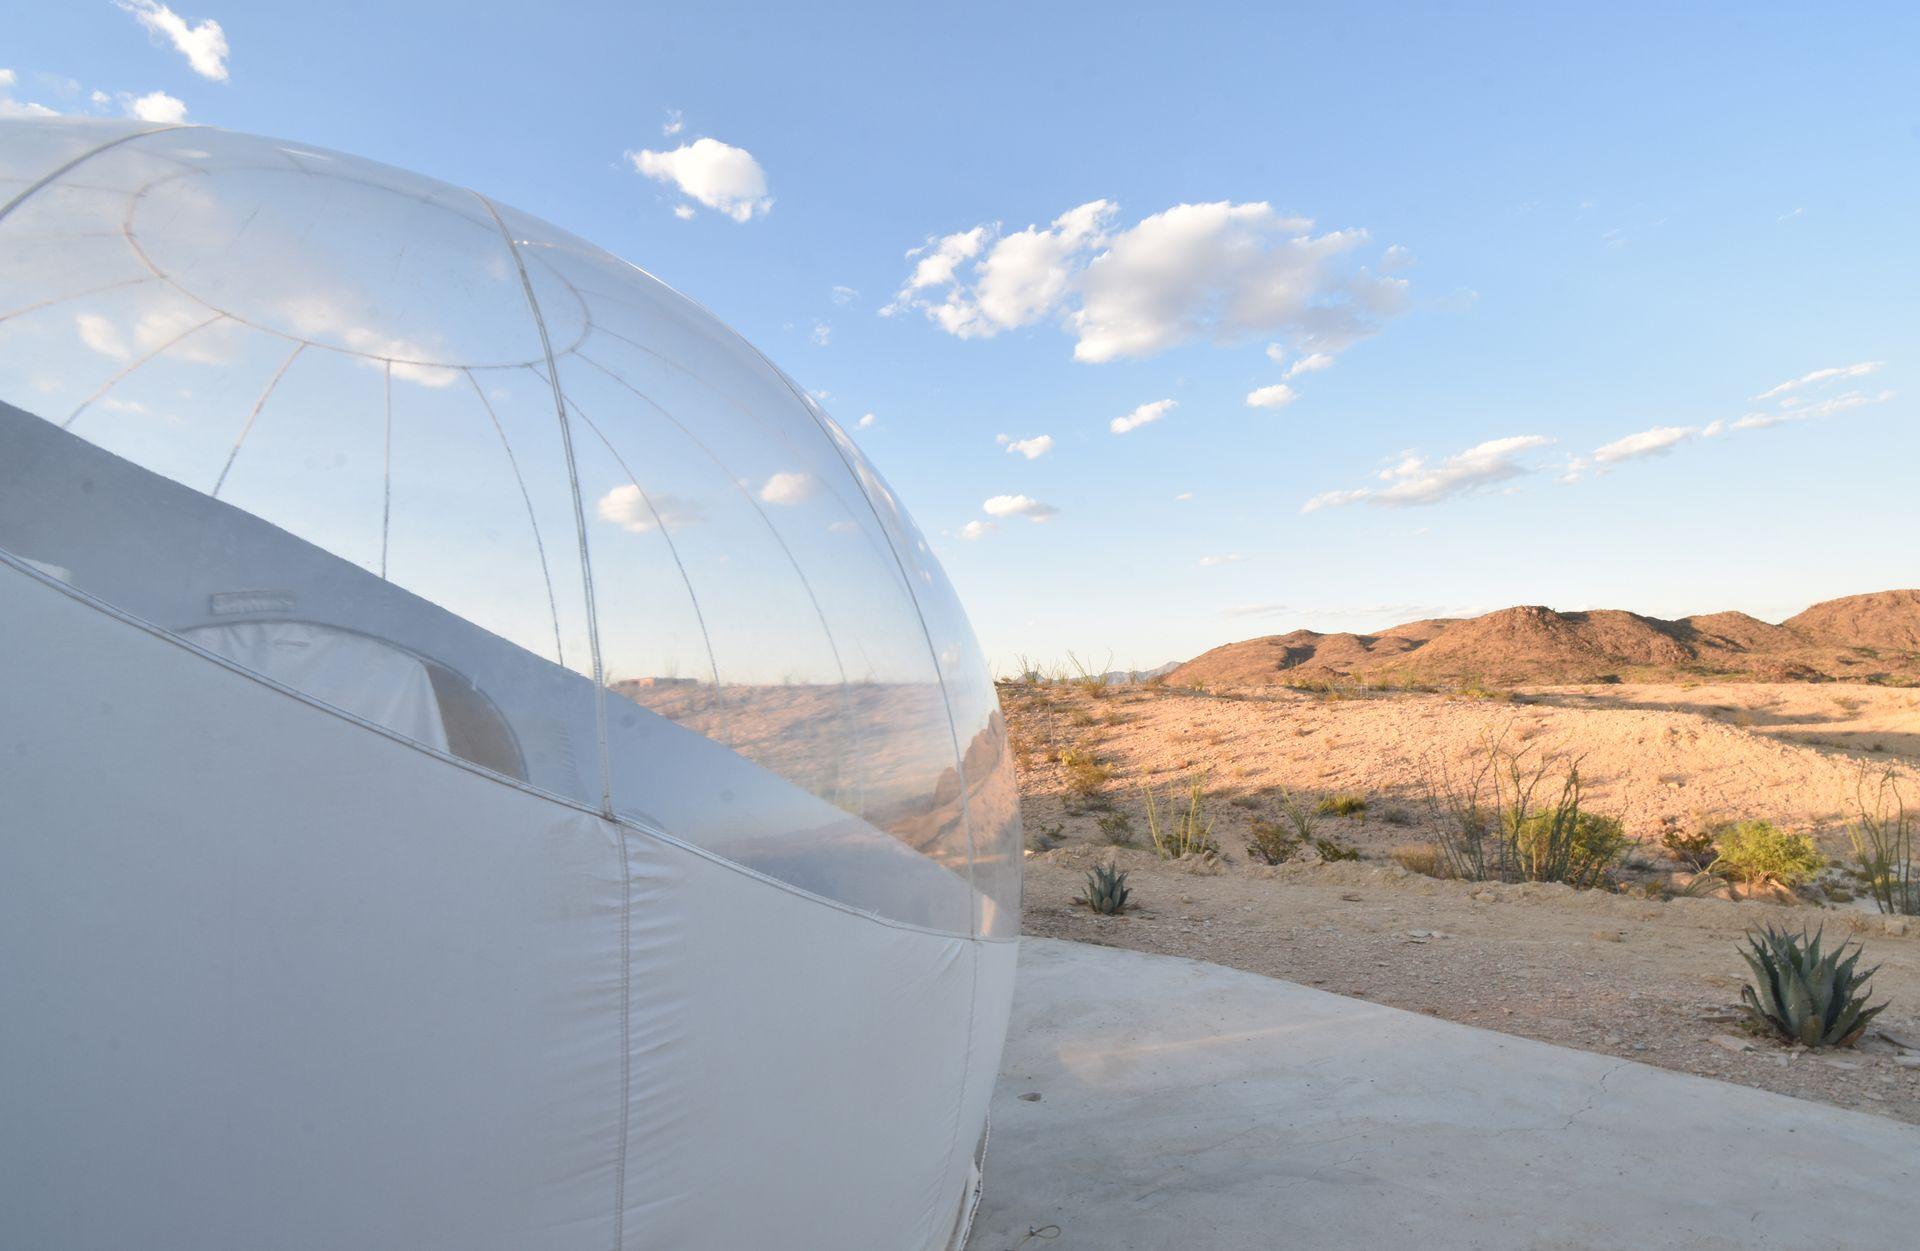 The side of a clear bubble and views looking out at the desert.